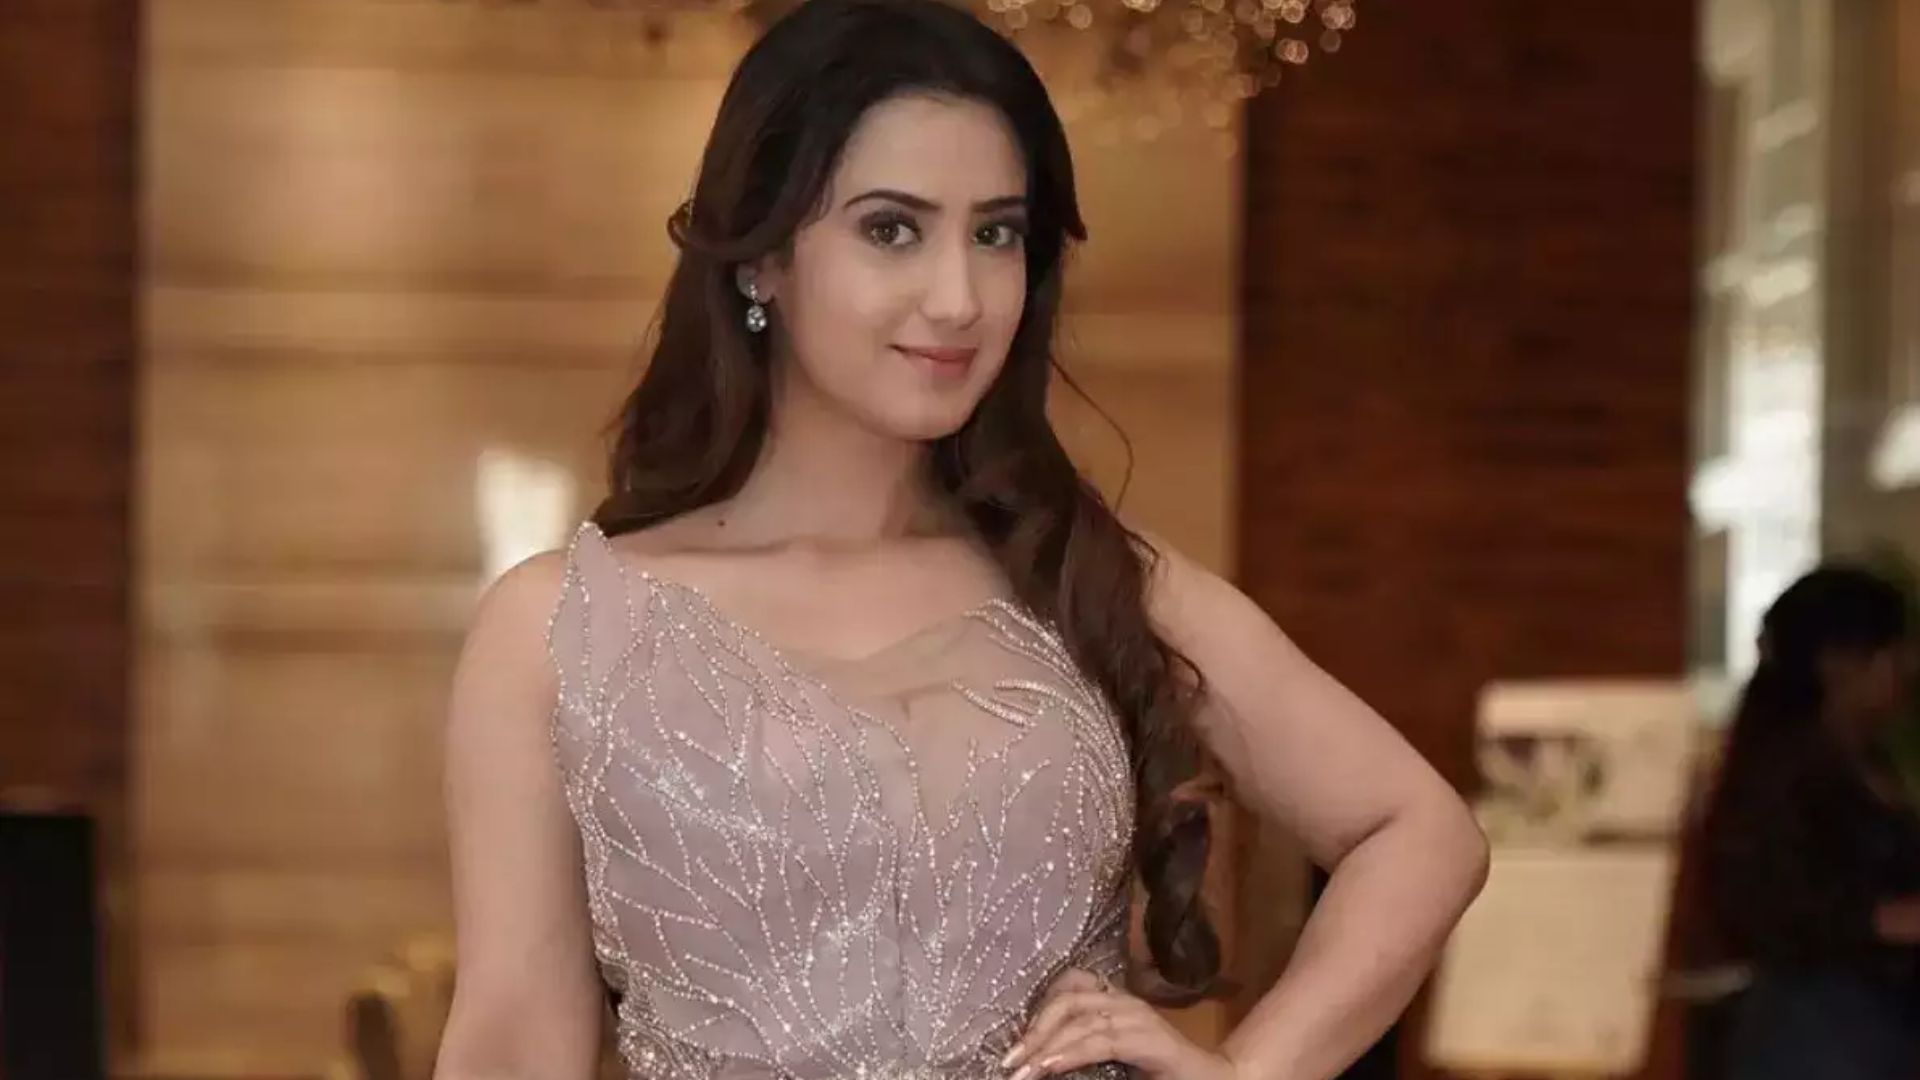 Aalisha Panwar - An Indian Television Actress Known For Her Dynamic Acting Skills And Versatility